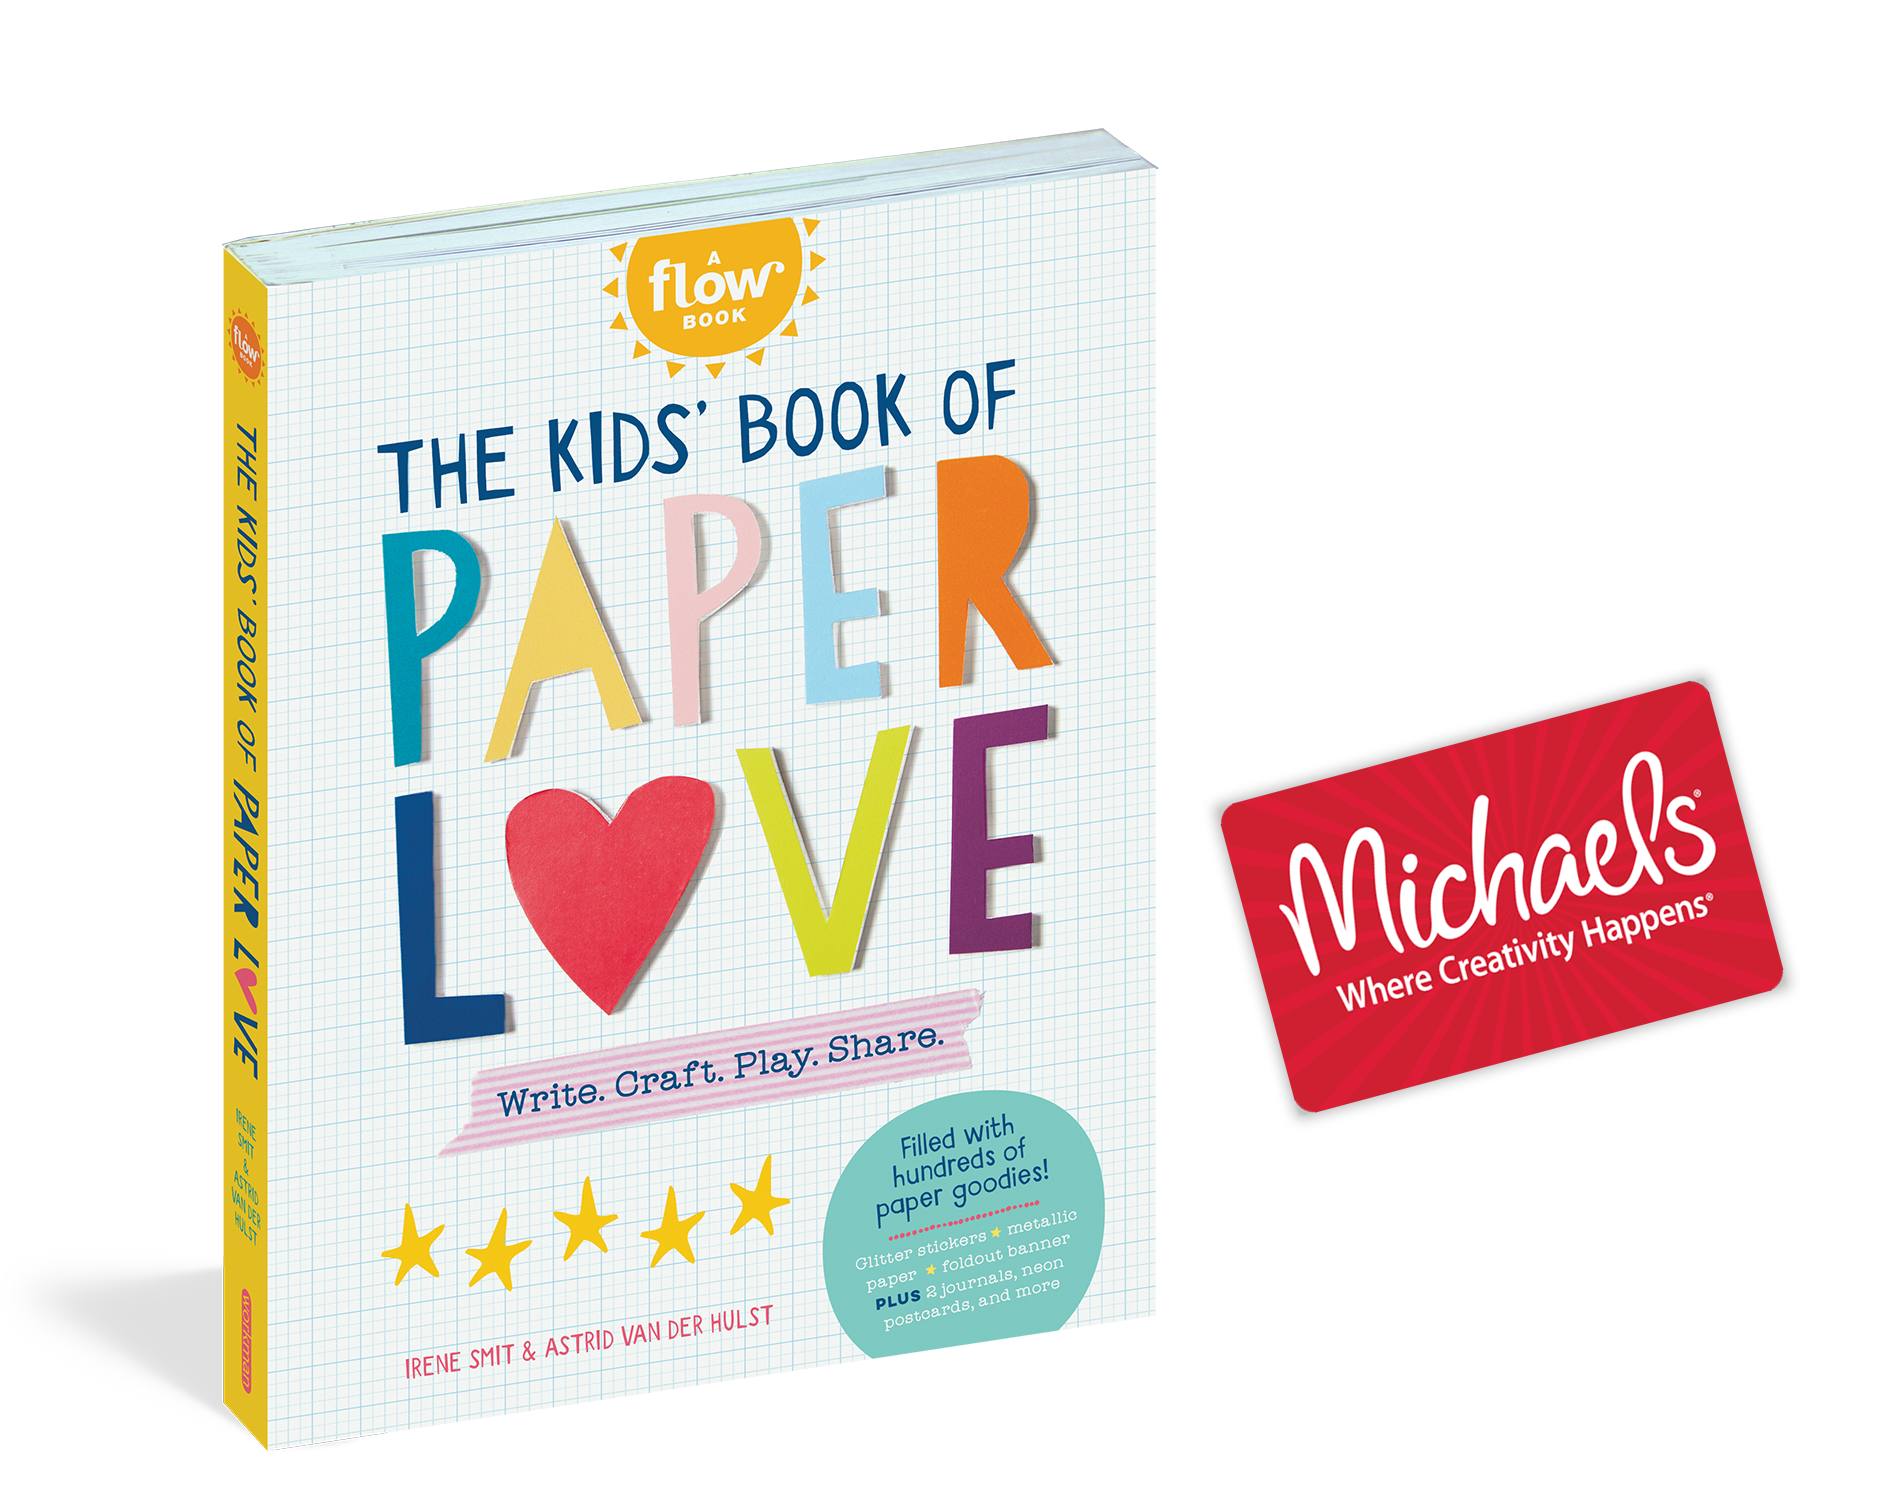 The Kids' Book of Paper Love giveaway